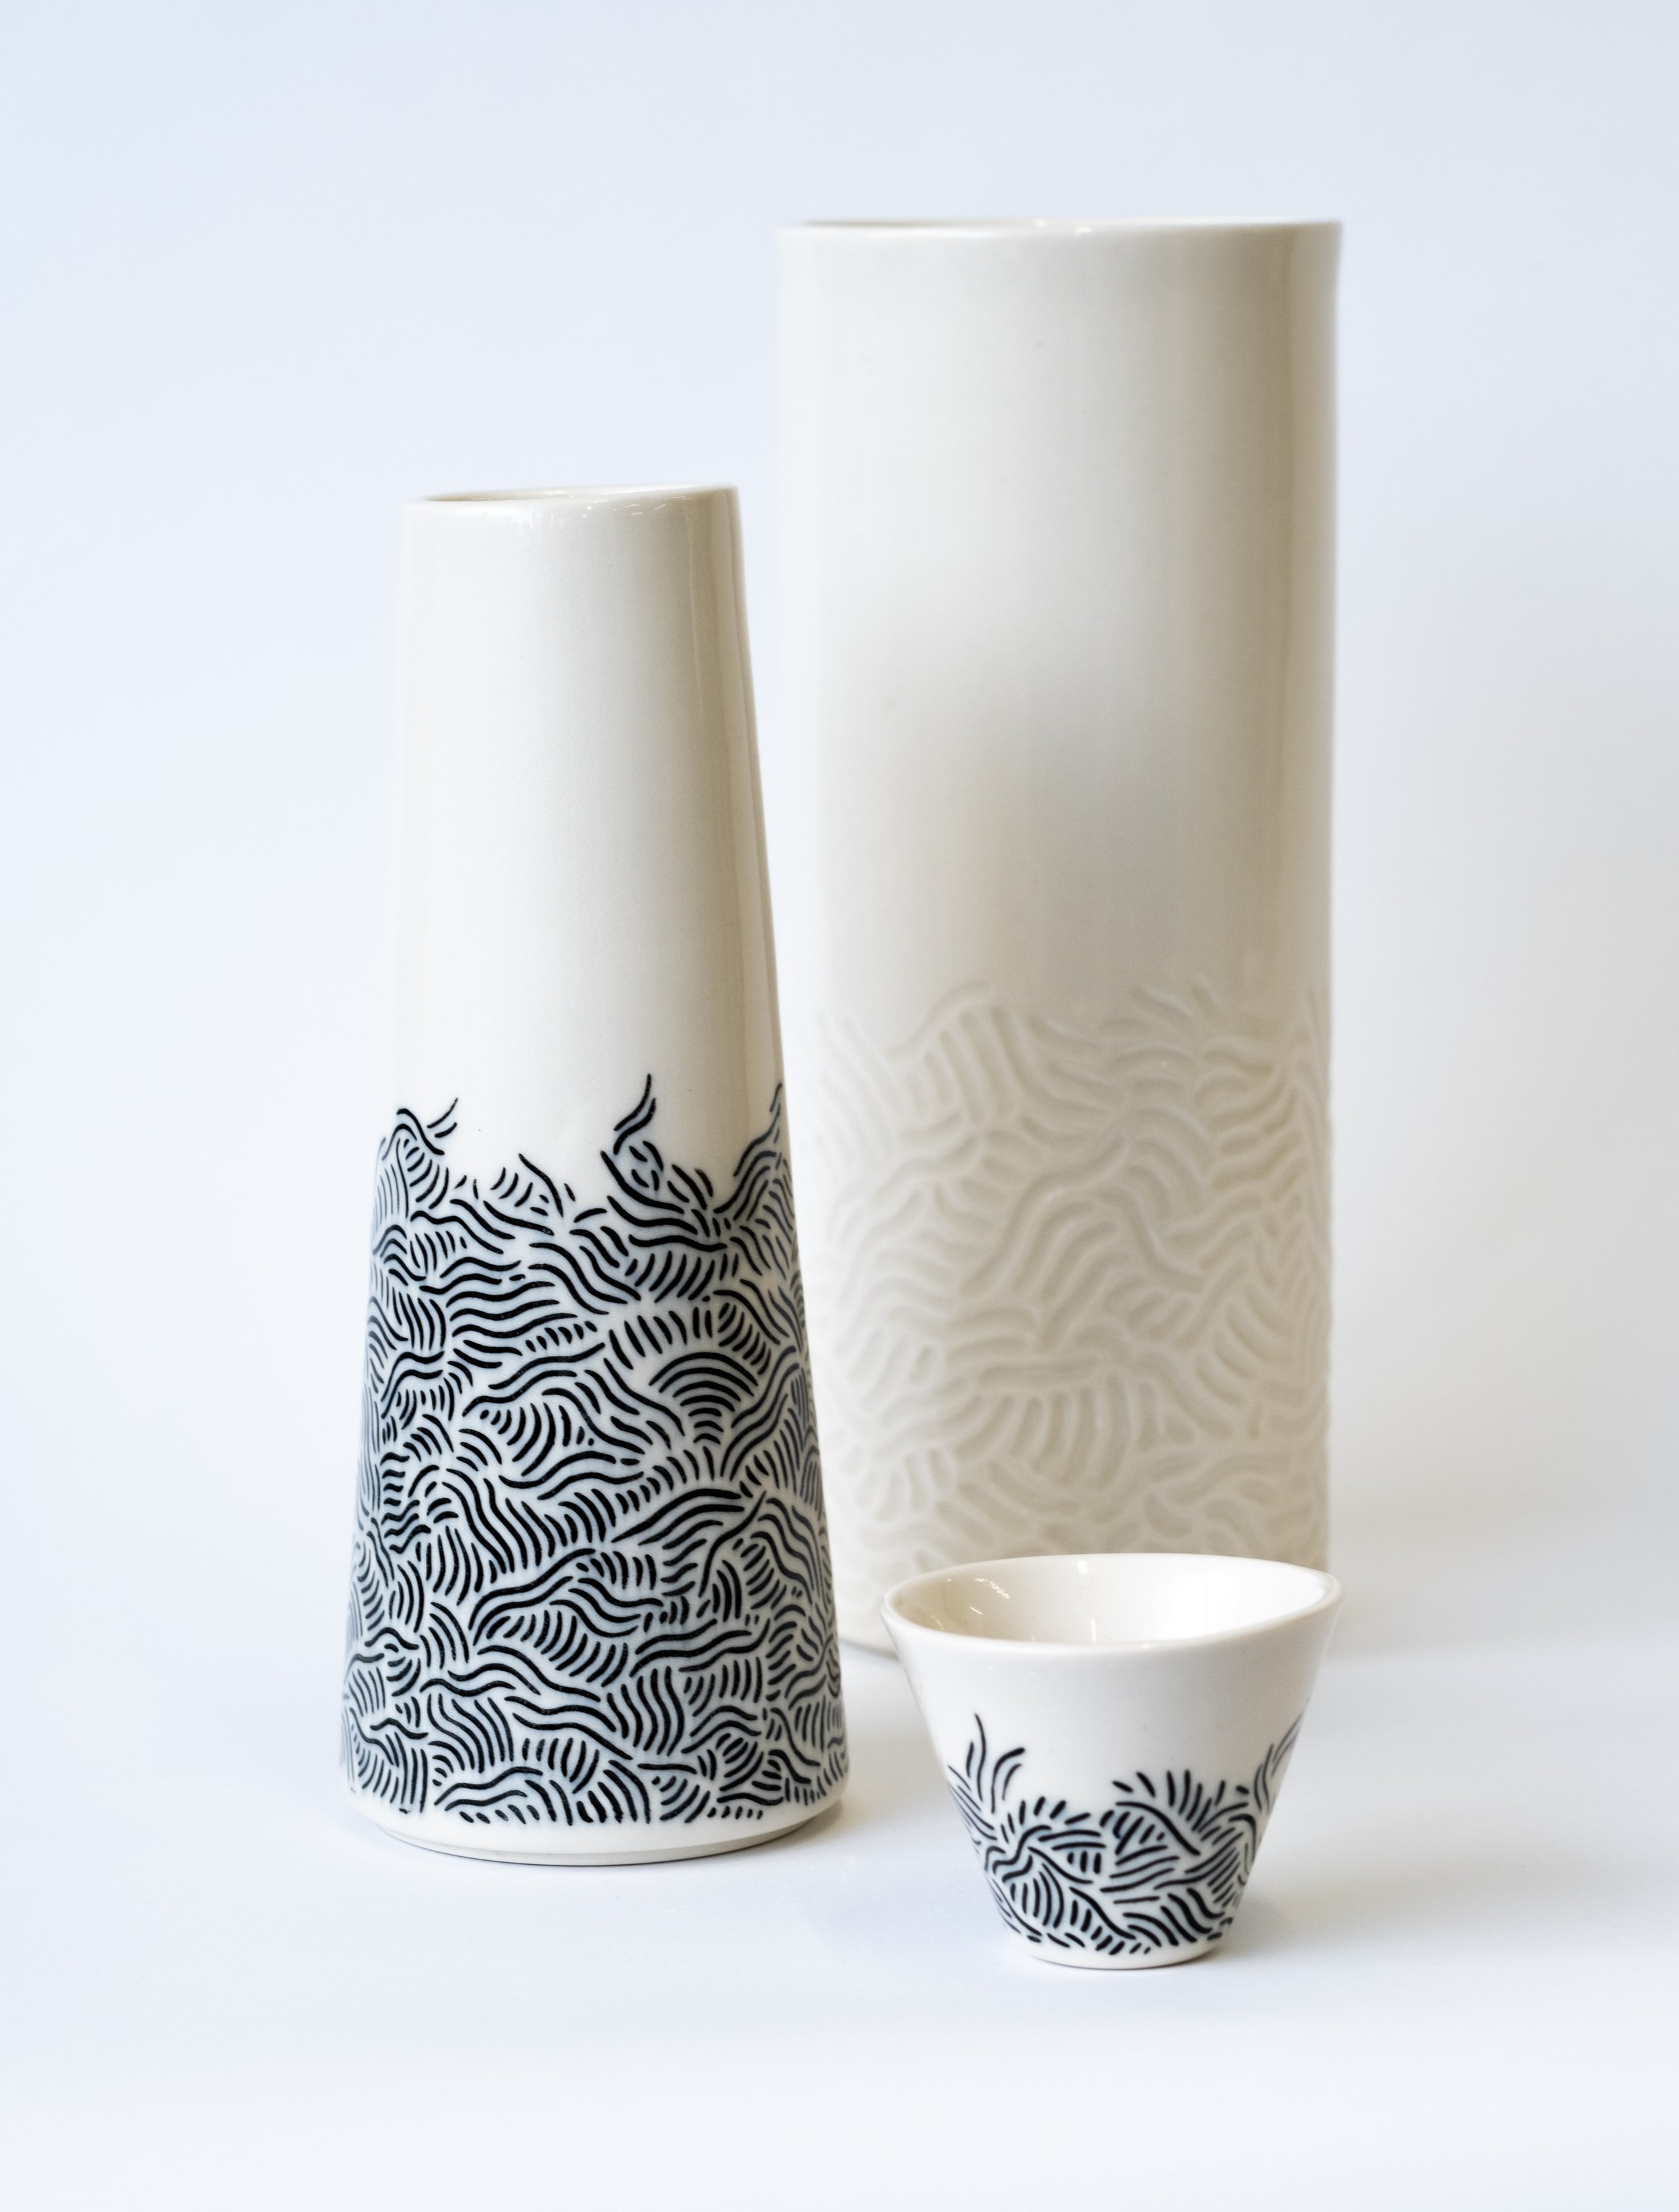 Ali-Potter-Ceramics-White-and-Black-Carved-Collection, photography by Anna Revesz.jpg